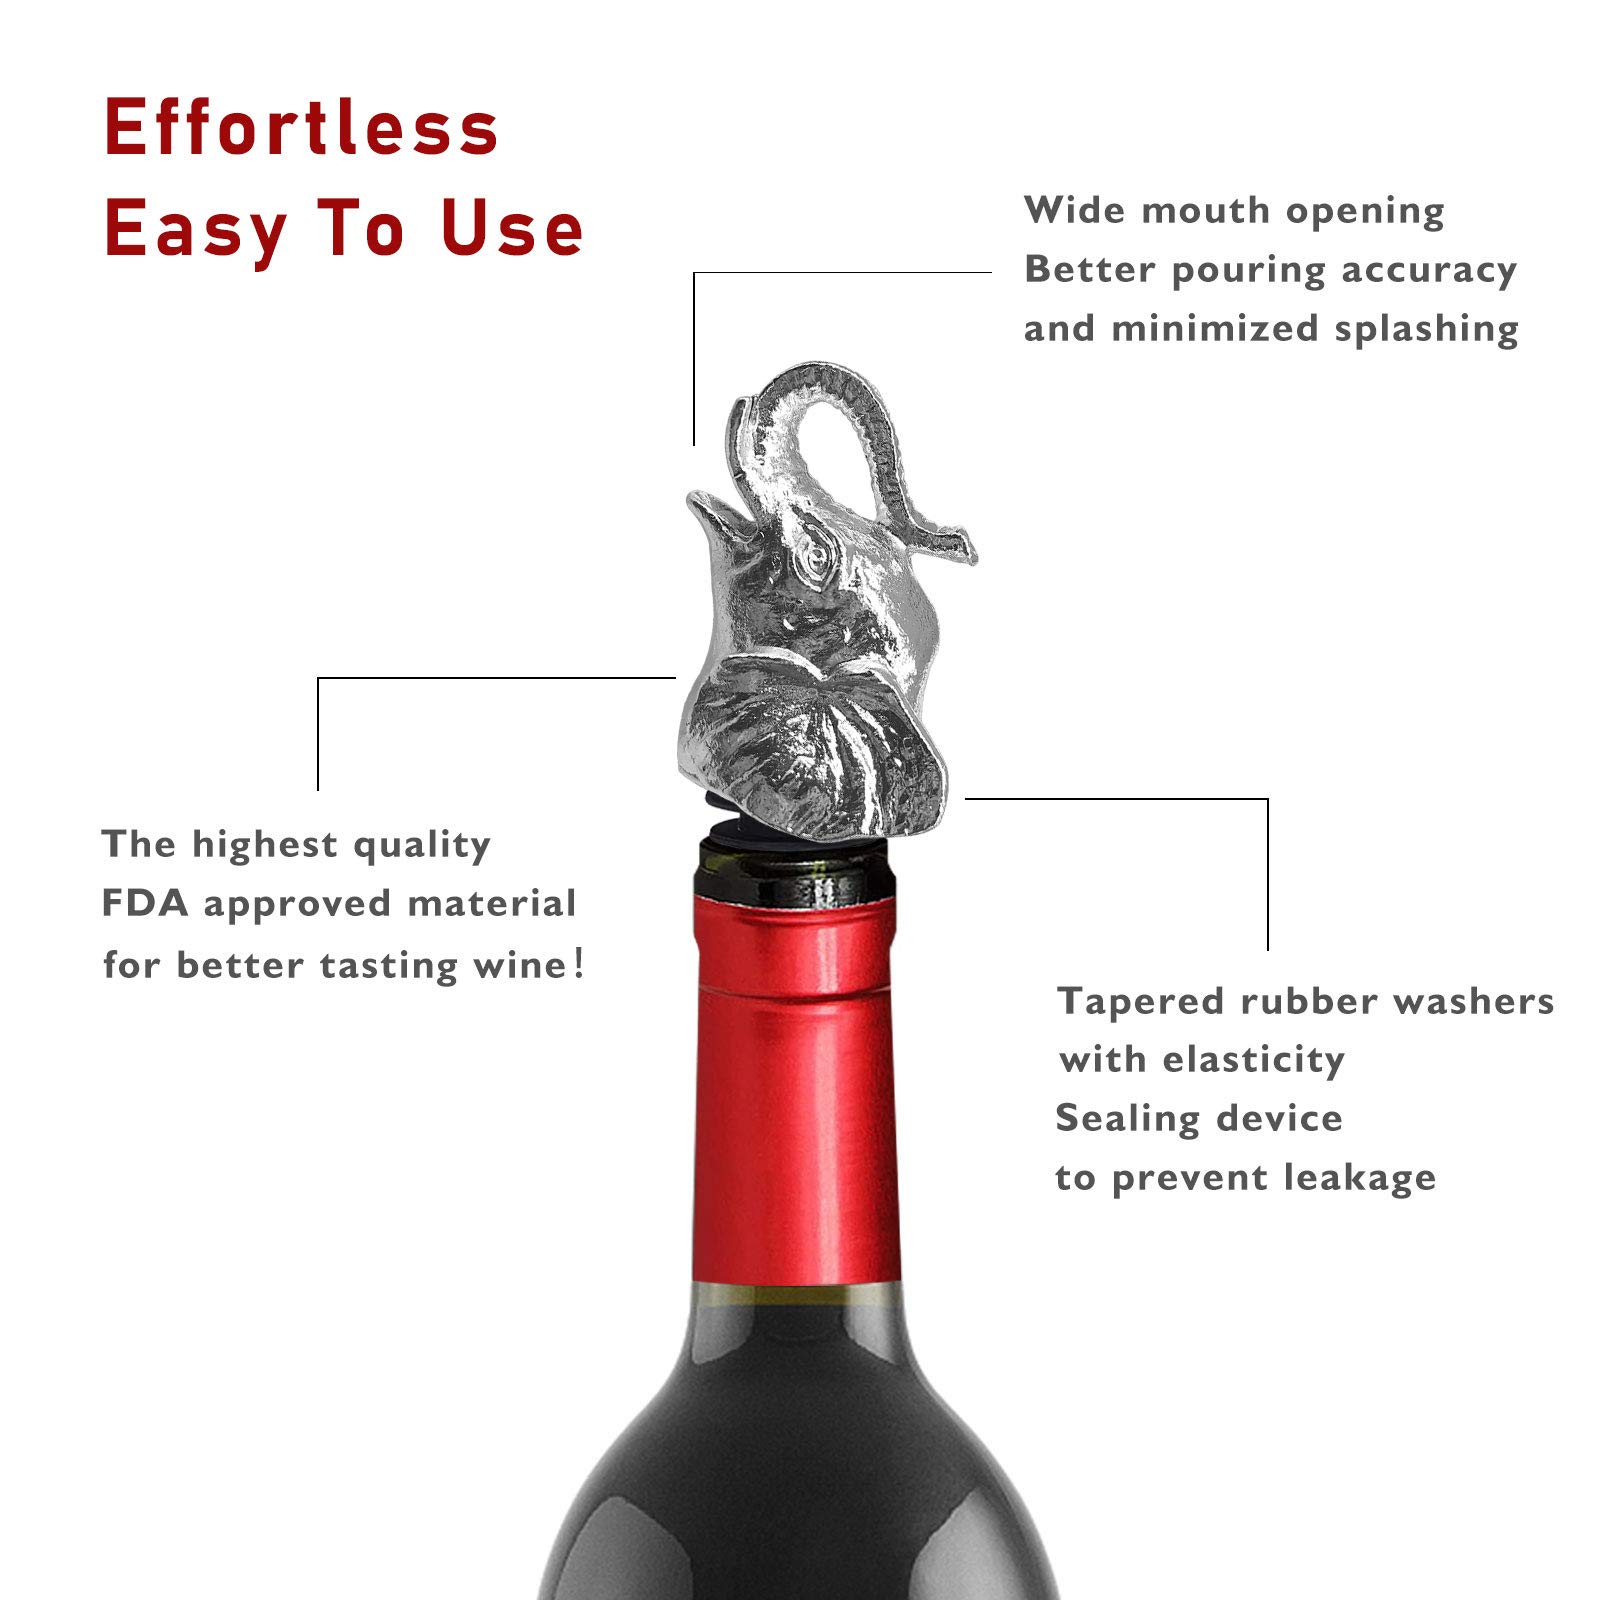 Stainless Steel Elephant Wine Pourer - wine aerators pourer for Robust Red and White Wine - Pour Amore Bottle Pourer/Stopper & Wine Air Diffuser (Silver elephant)